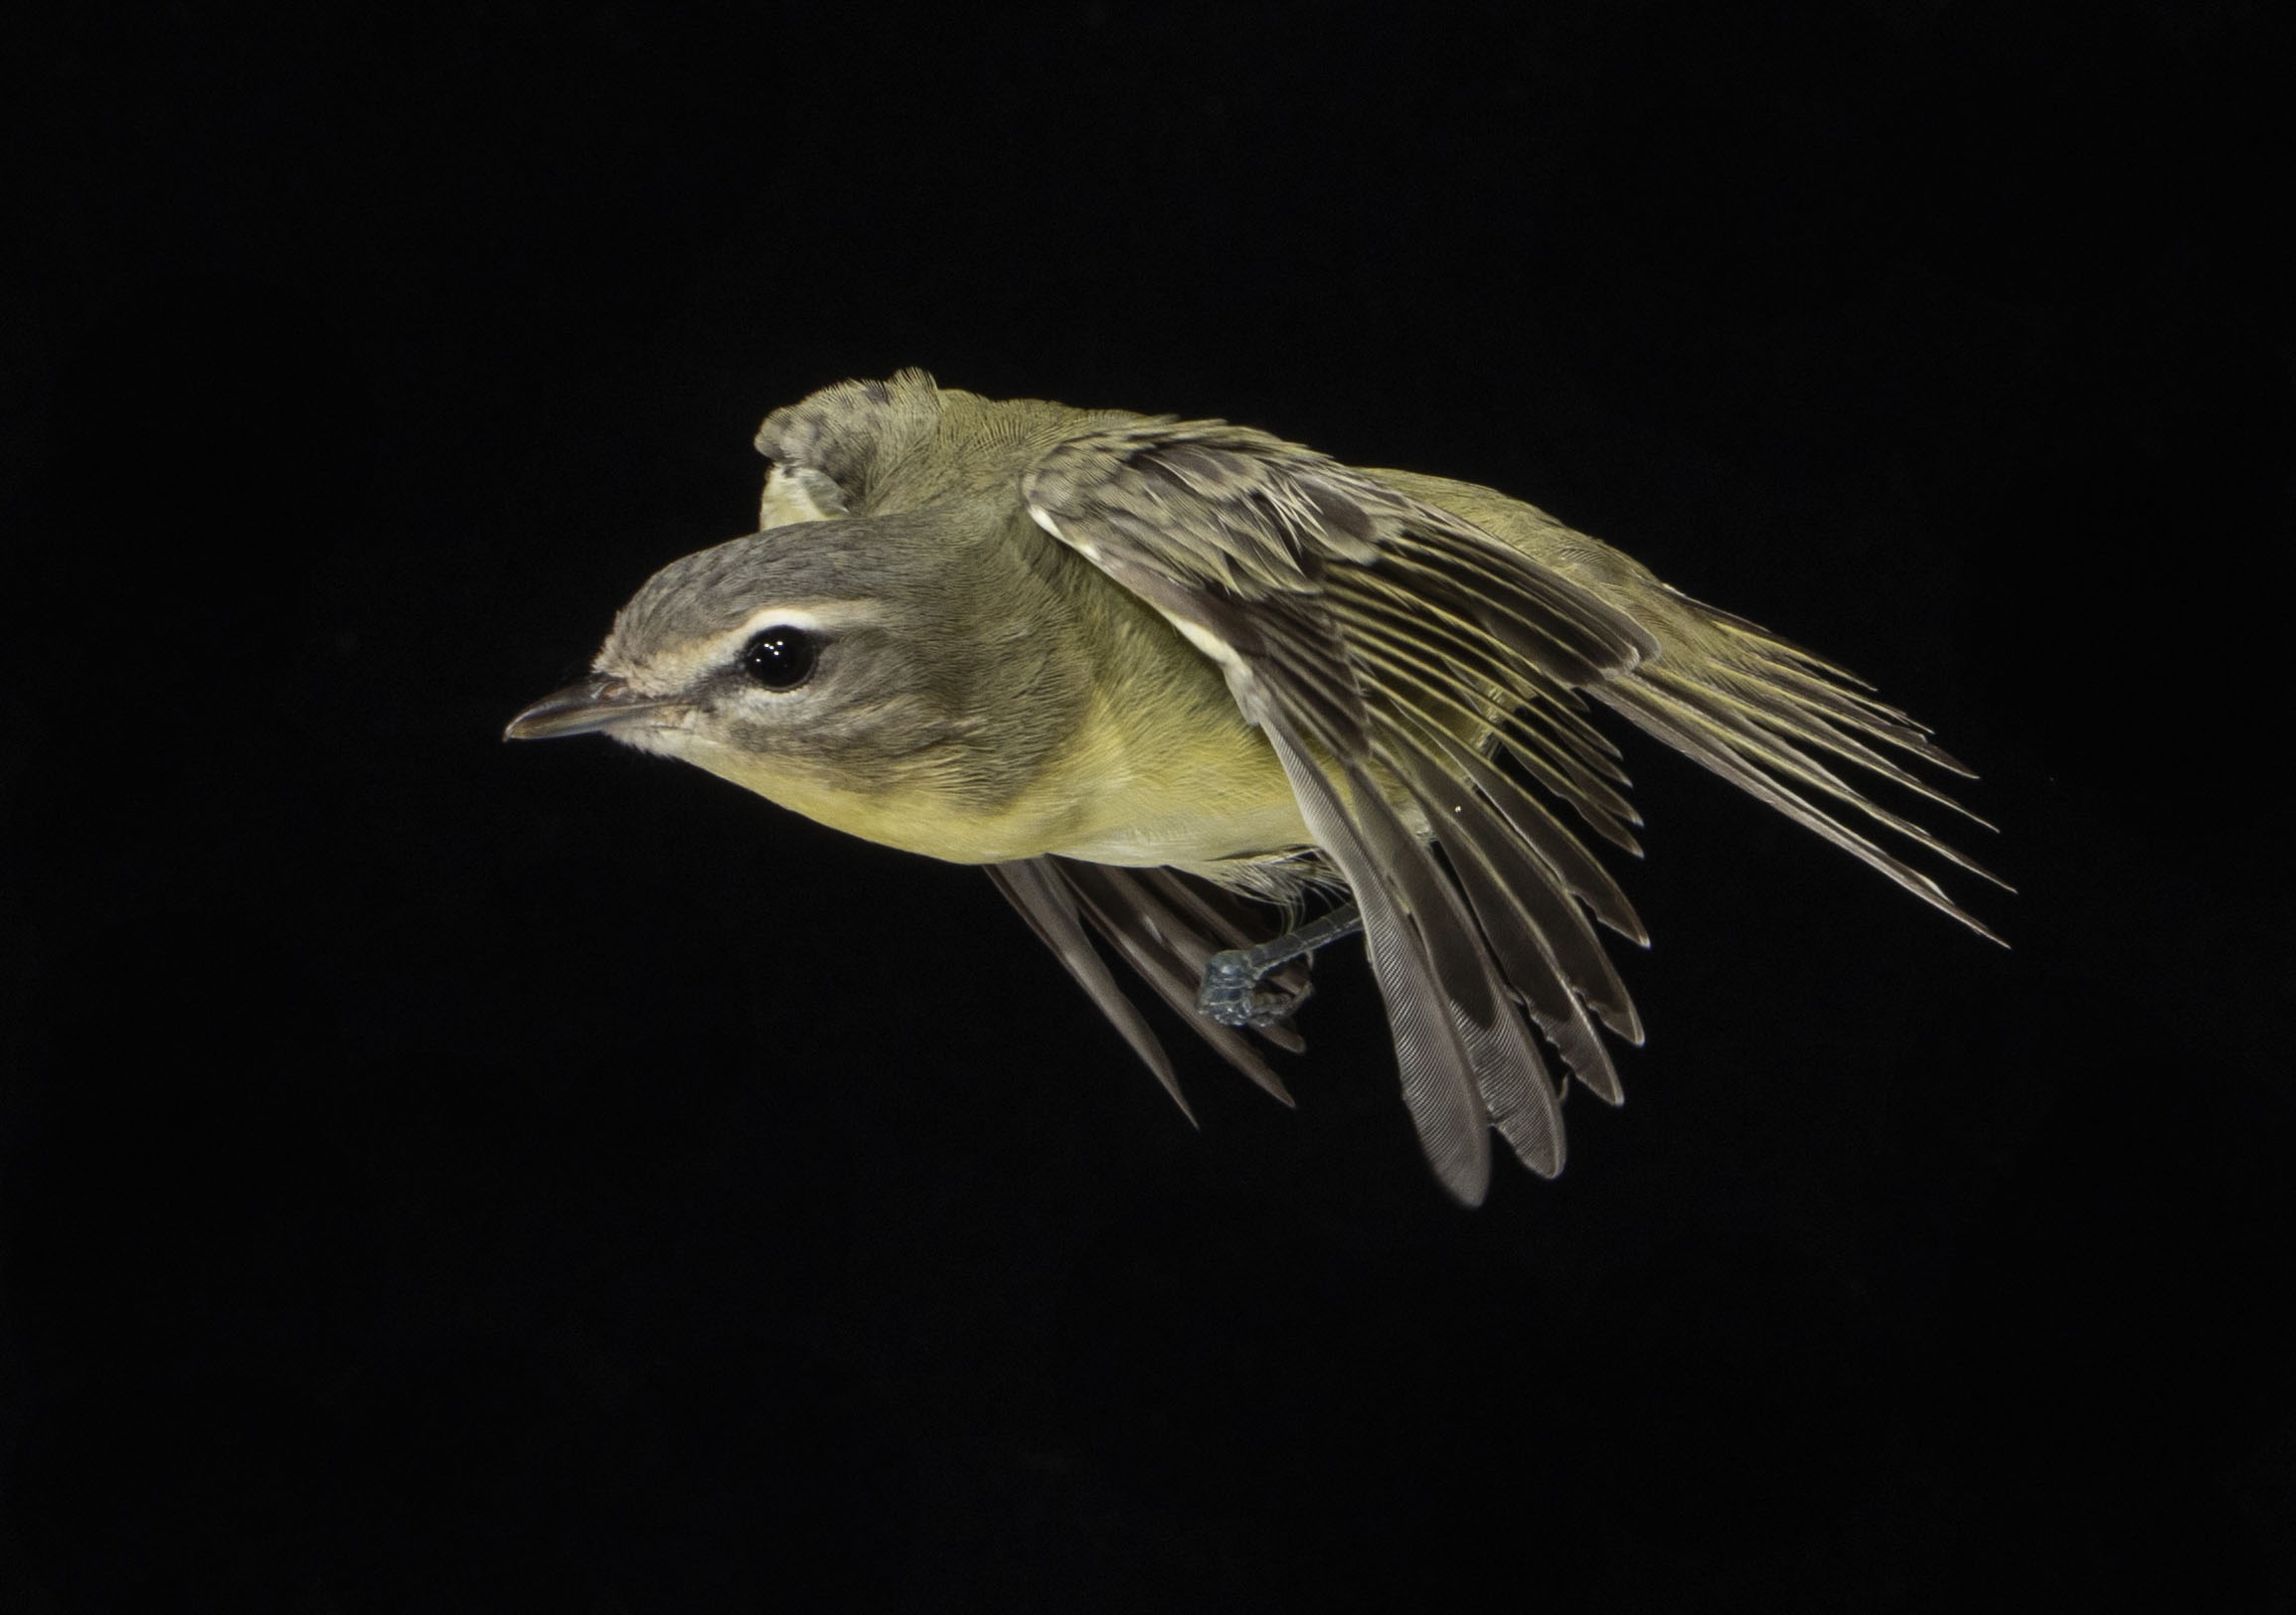 A Philadelphia Vireo in flight with a black background